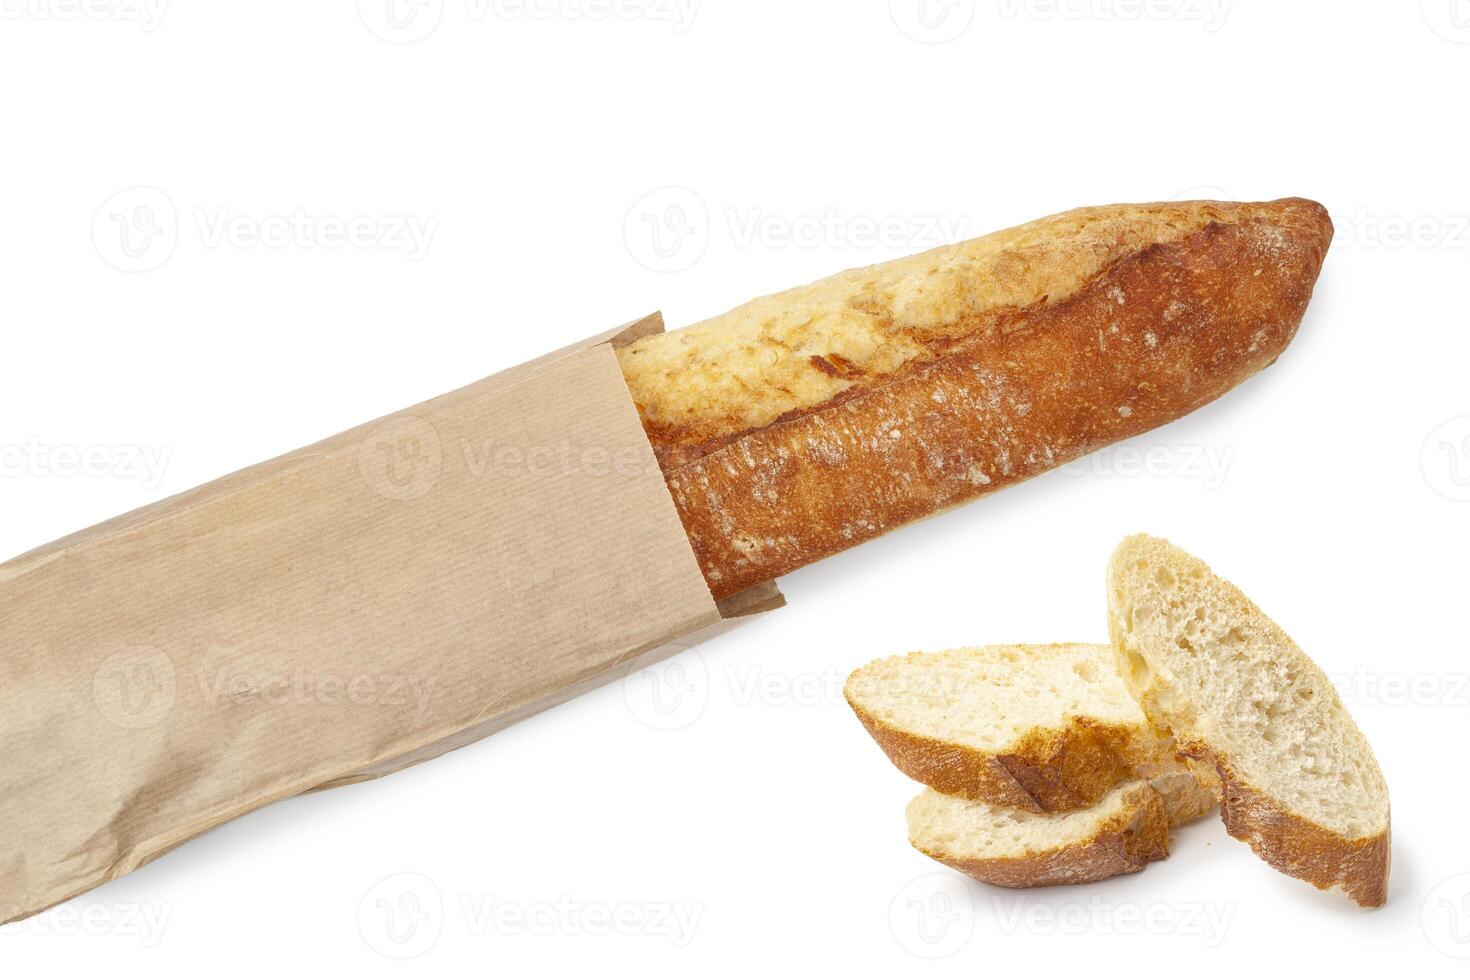 Freshly baked baguette in a paper package photo